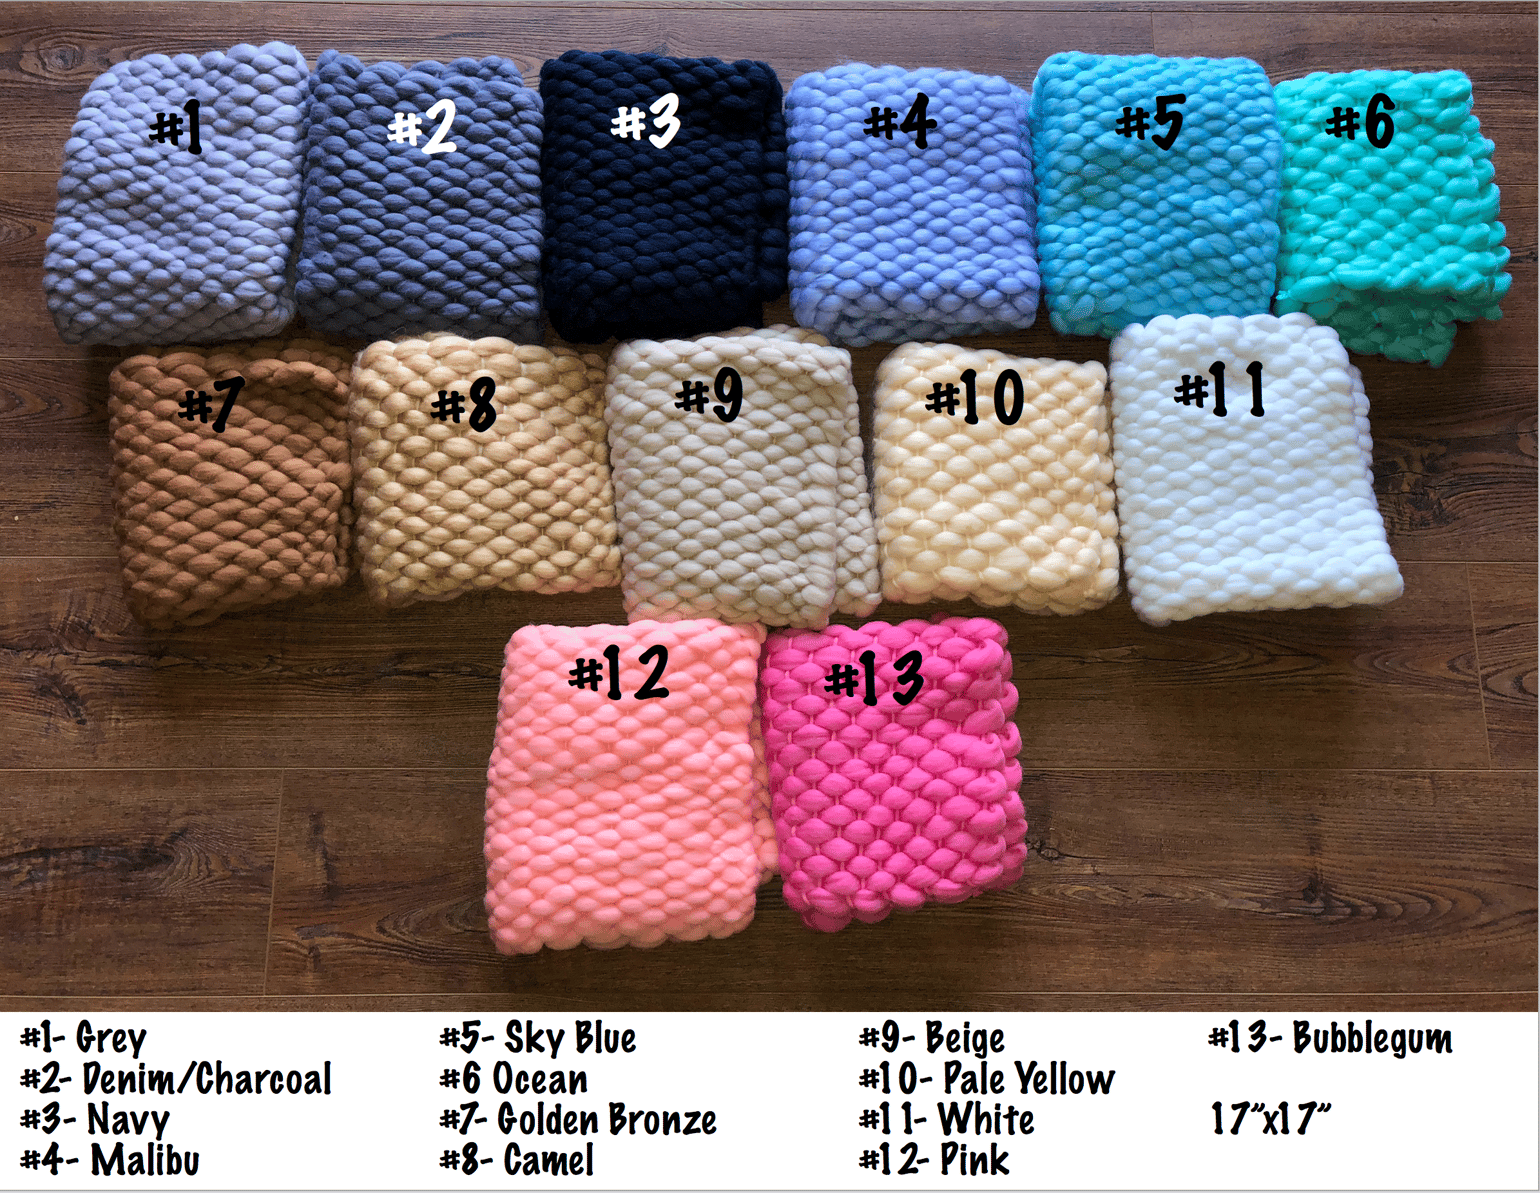 Image of RTS Wool Bumpy Blankets/Layers